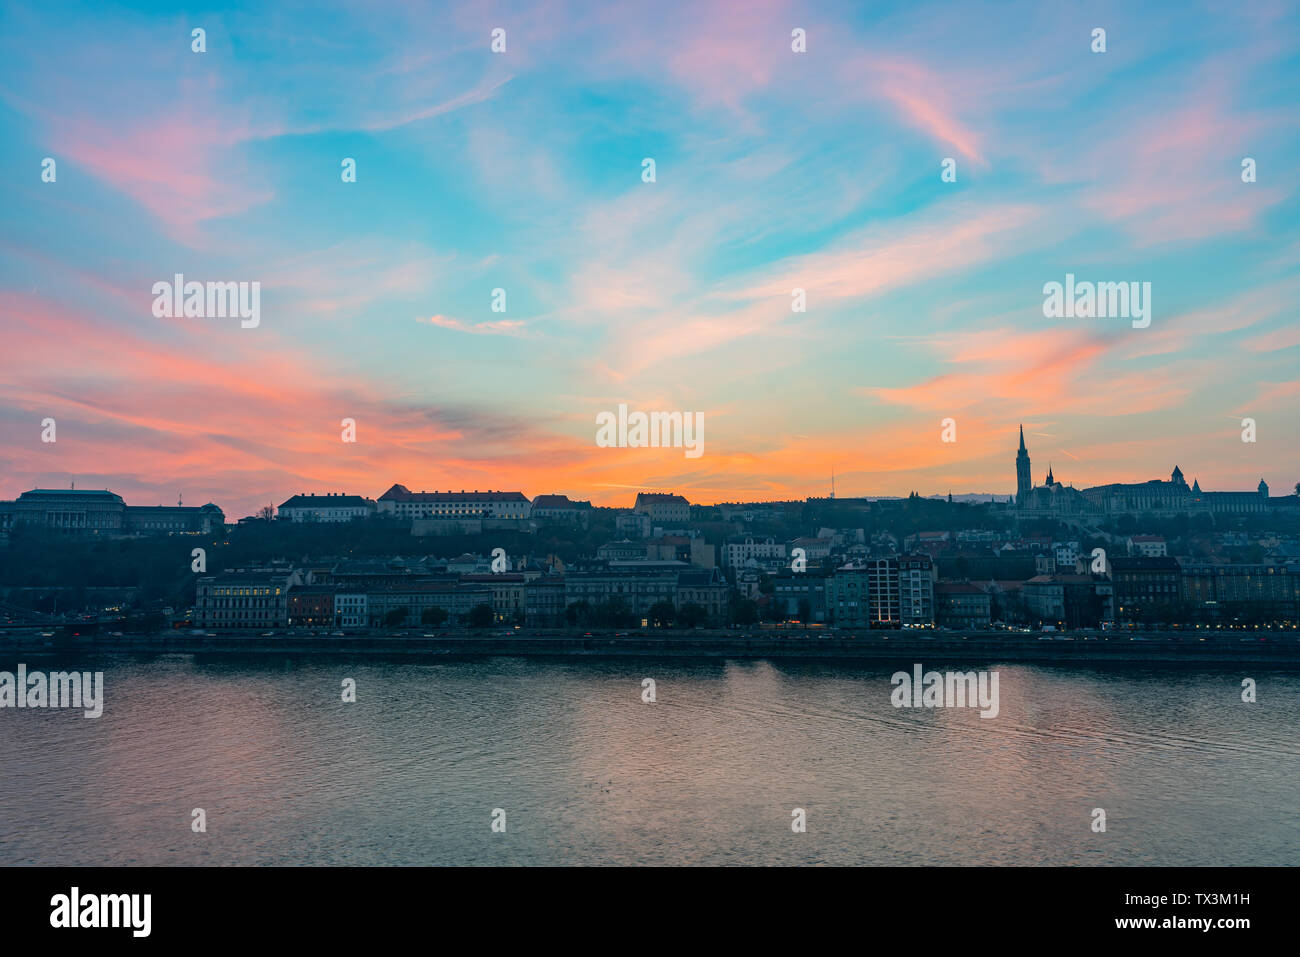 Sunset view of the Matthias Church and River Danube bank at Budapest, Hungary Stock Photo